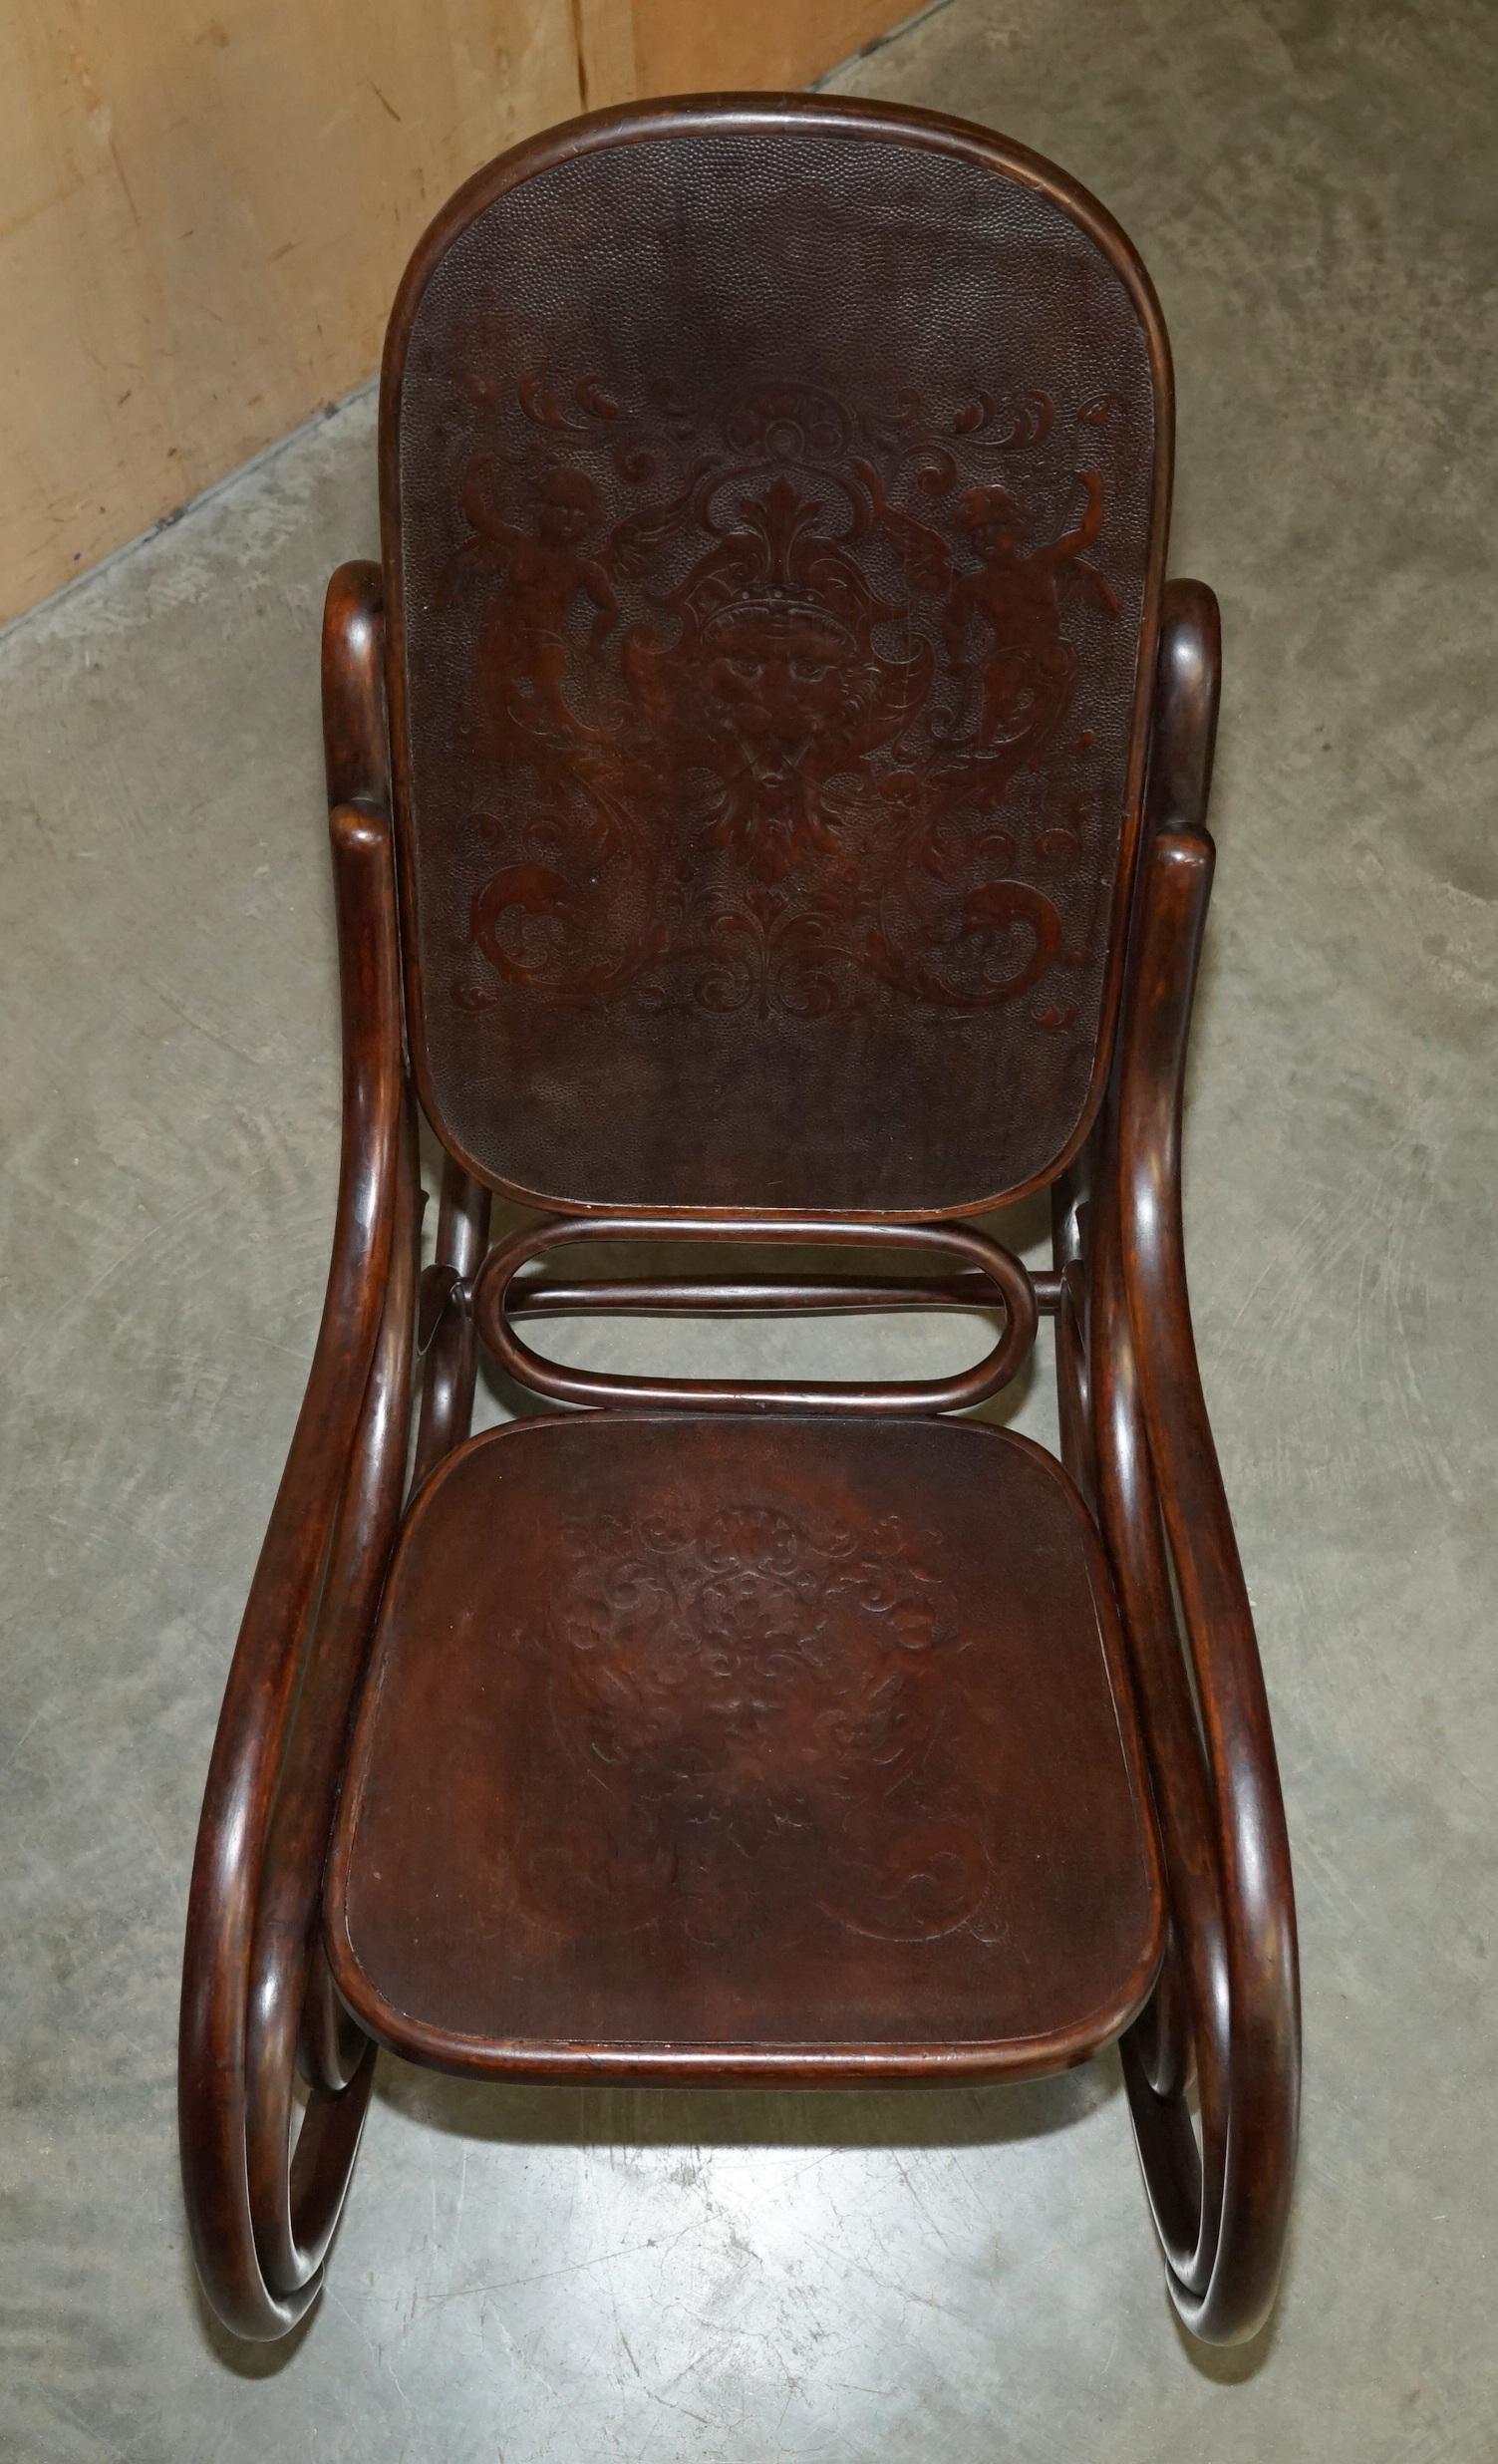 Bentwood EXQUISITE ViCTORIAN THONET ROCKING CHAIR WITH CHERUB CARVED BACK & SEAT PANELS For Sale